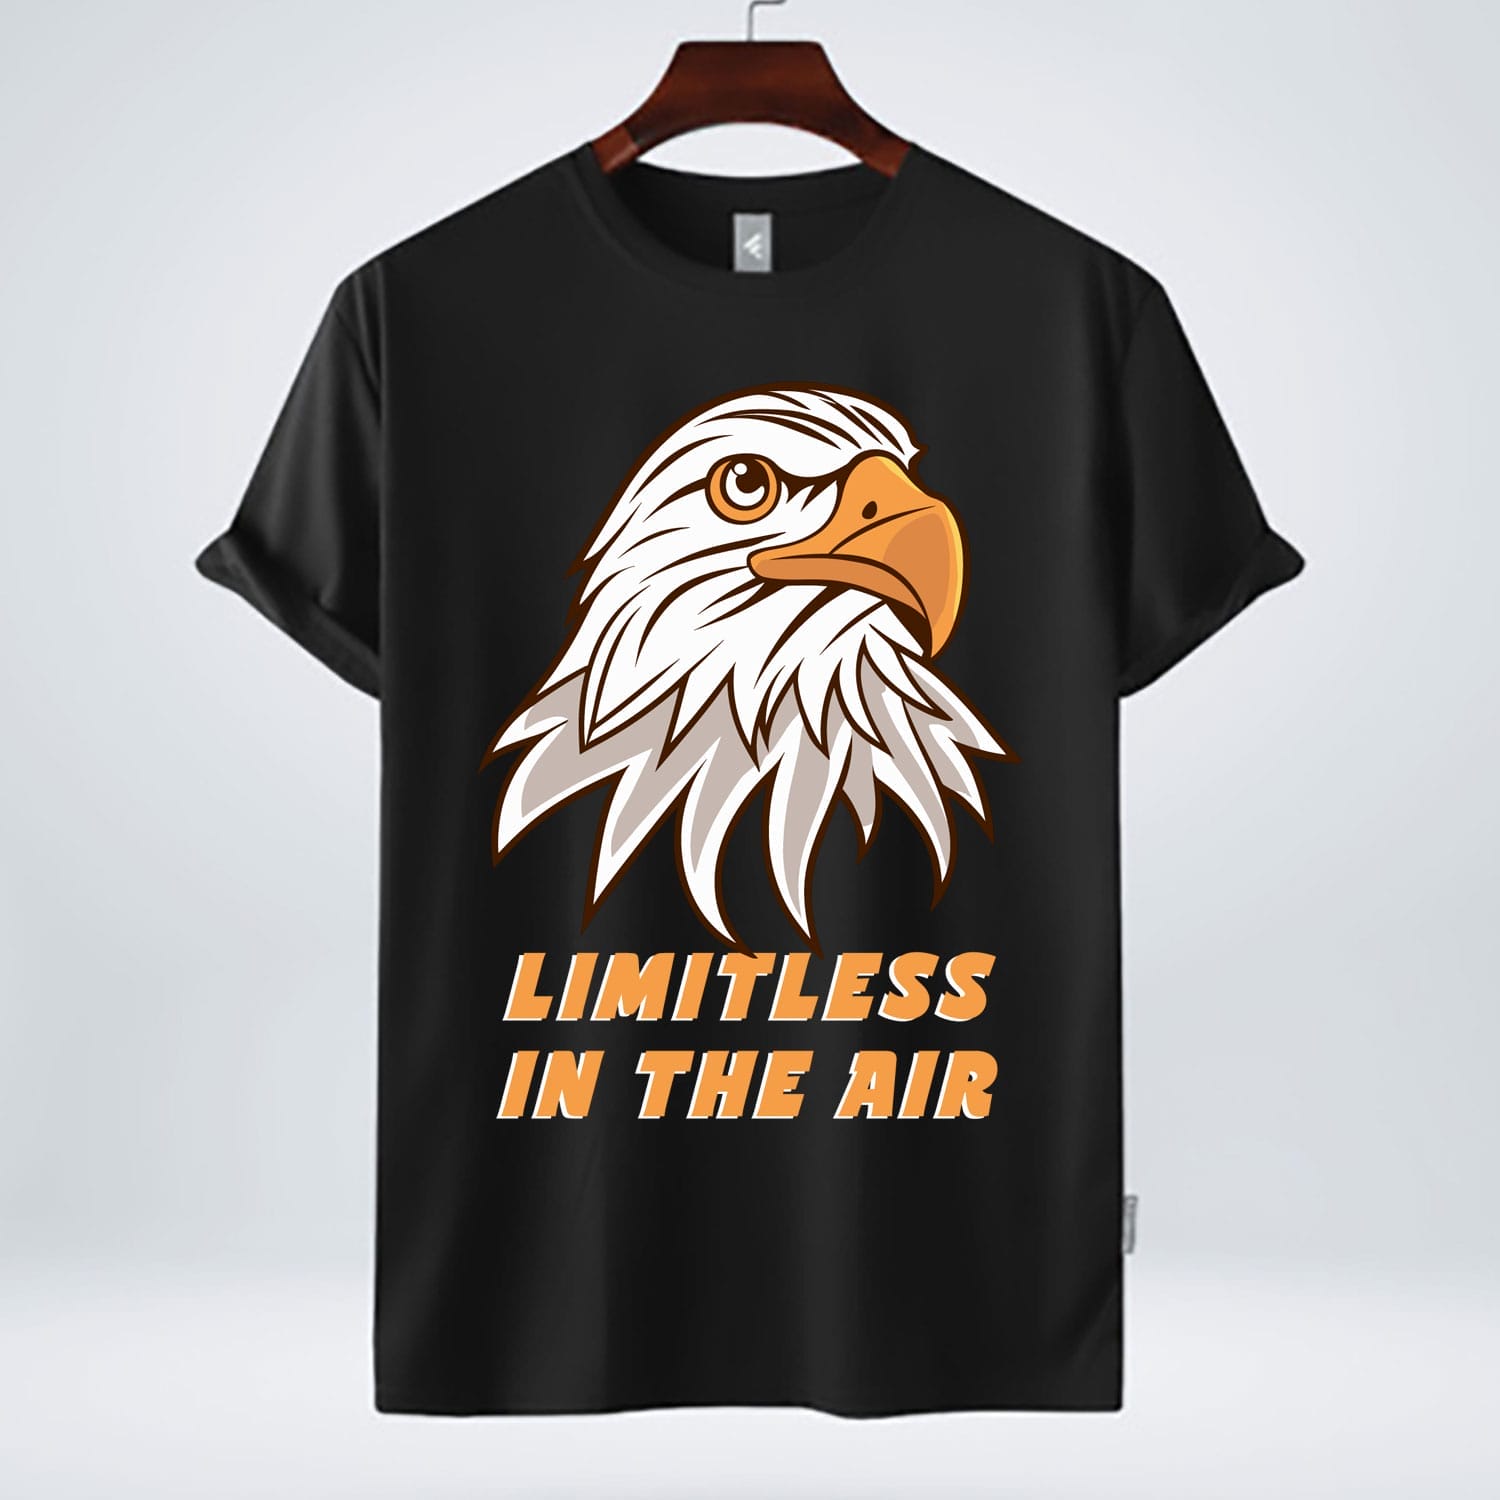 Limitless in the air eagle Tshirt Design